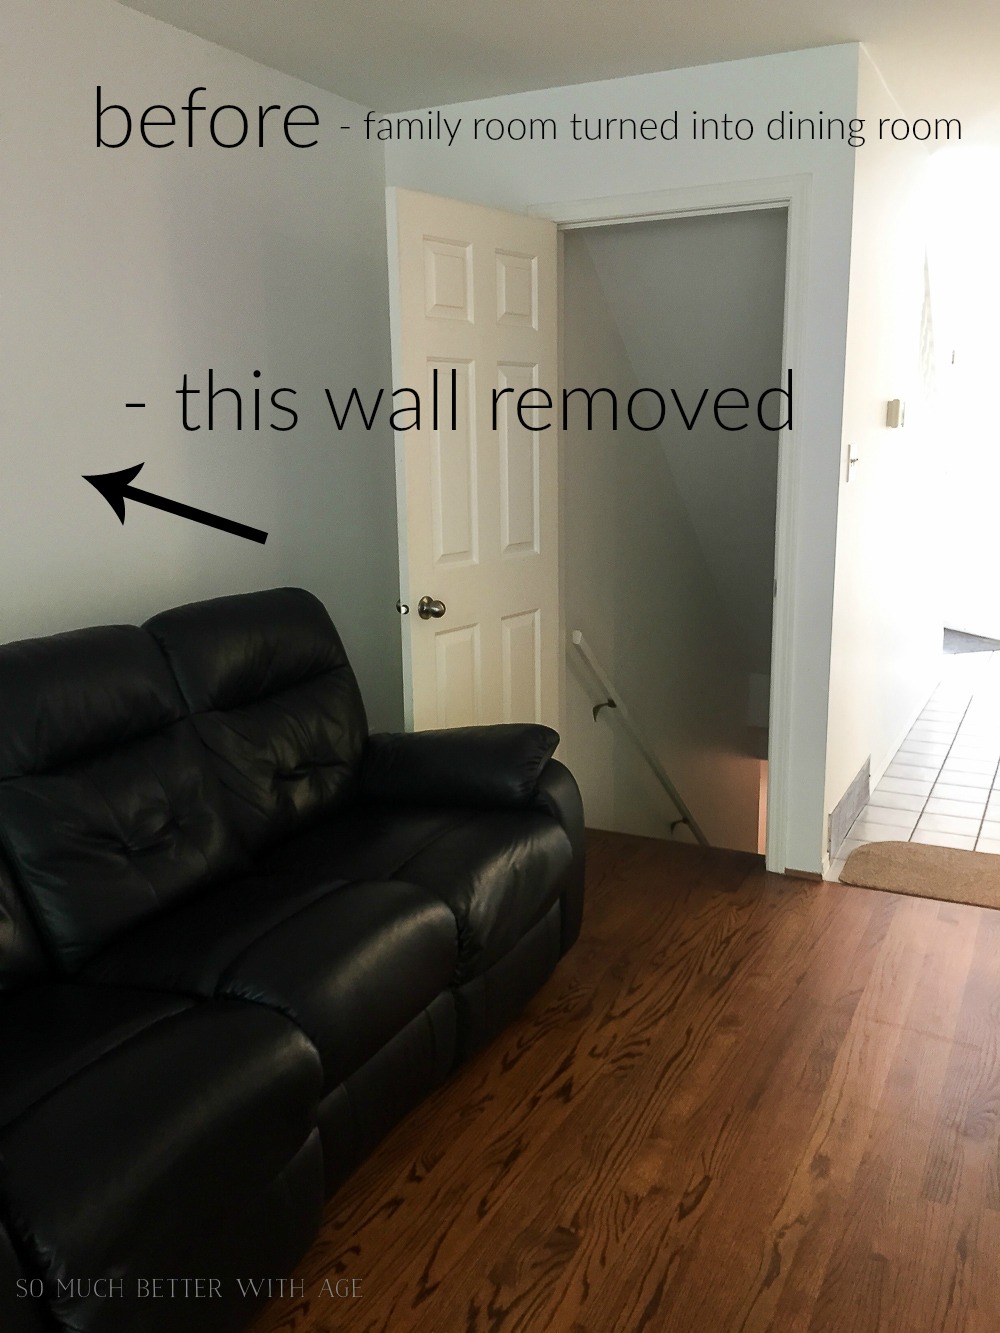  Arrows pointing to the walls that have been removed.